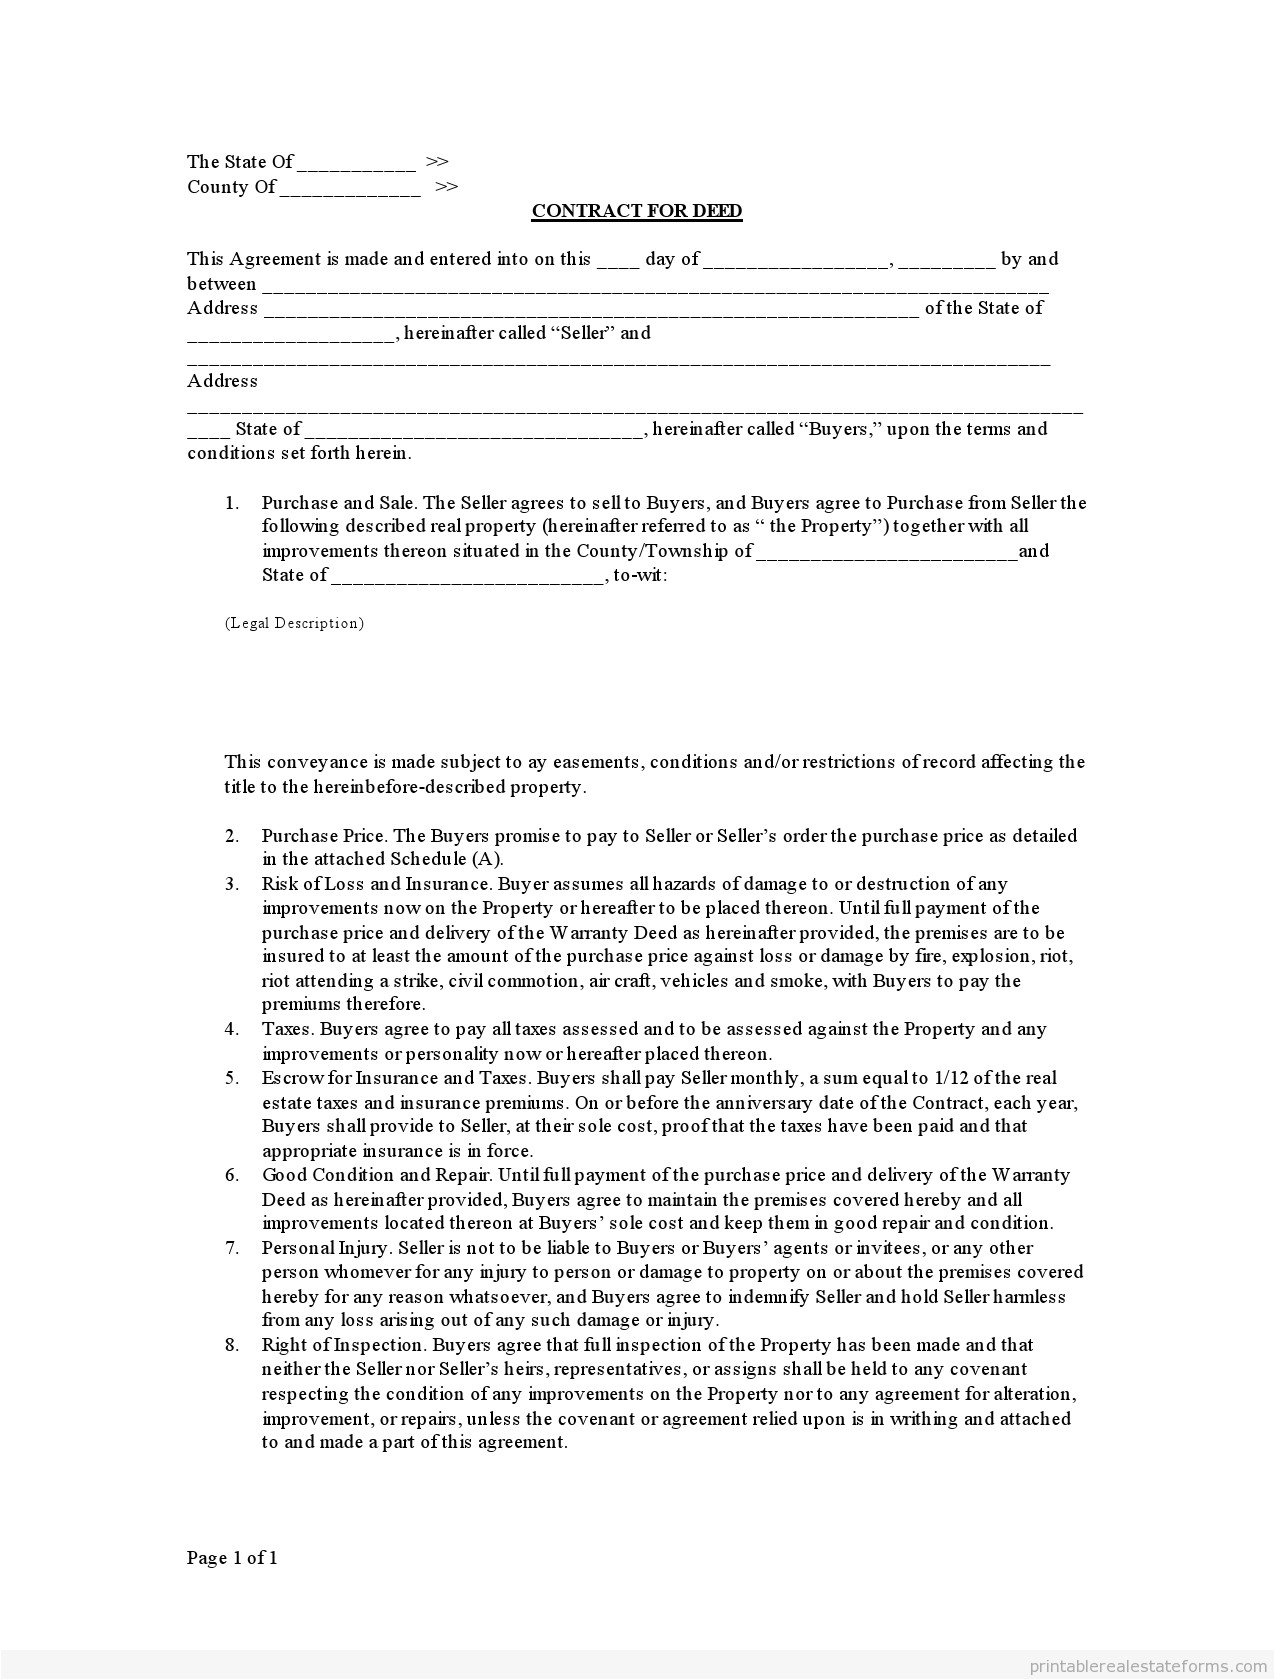 Free Printable Contract for Deed Template Free Printable Contract for Deed form Basic Templates